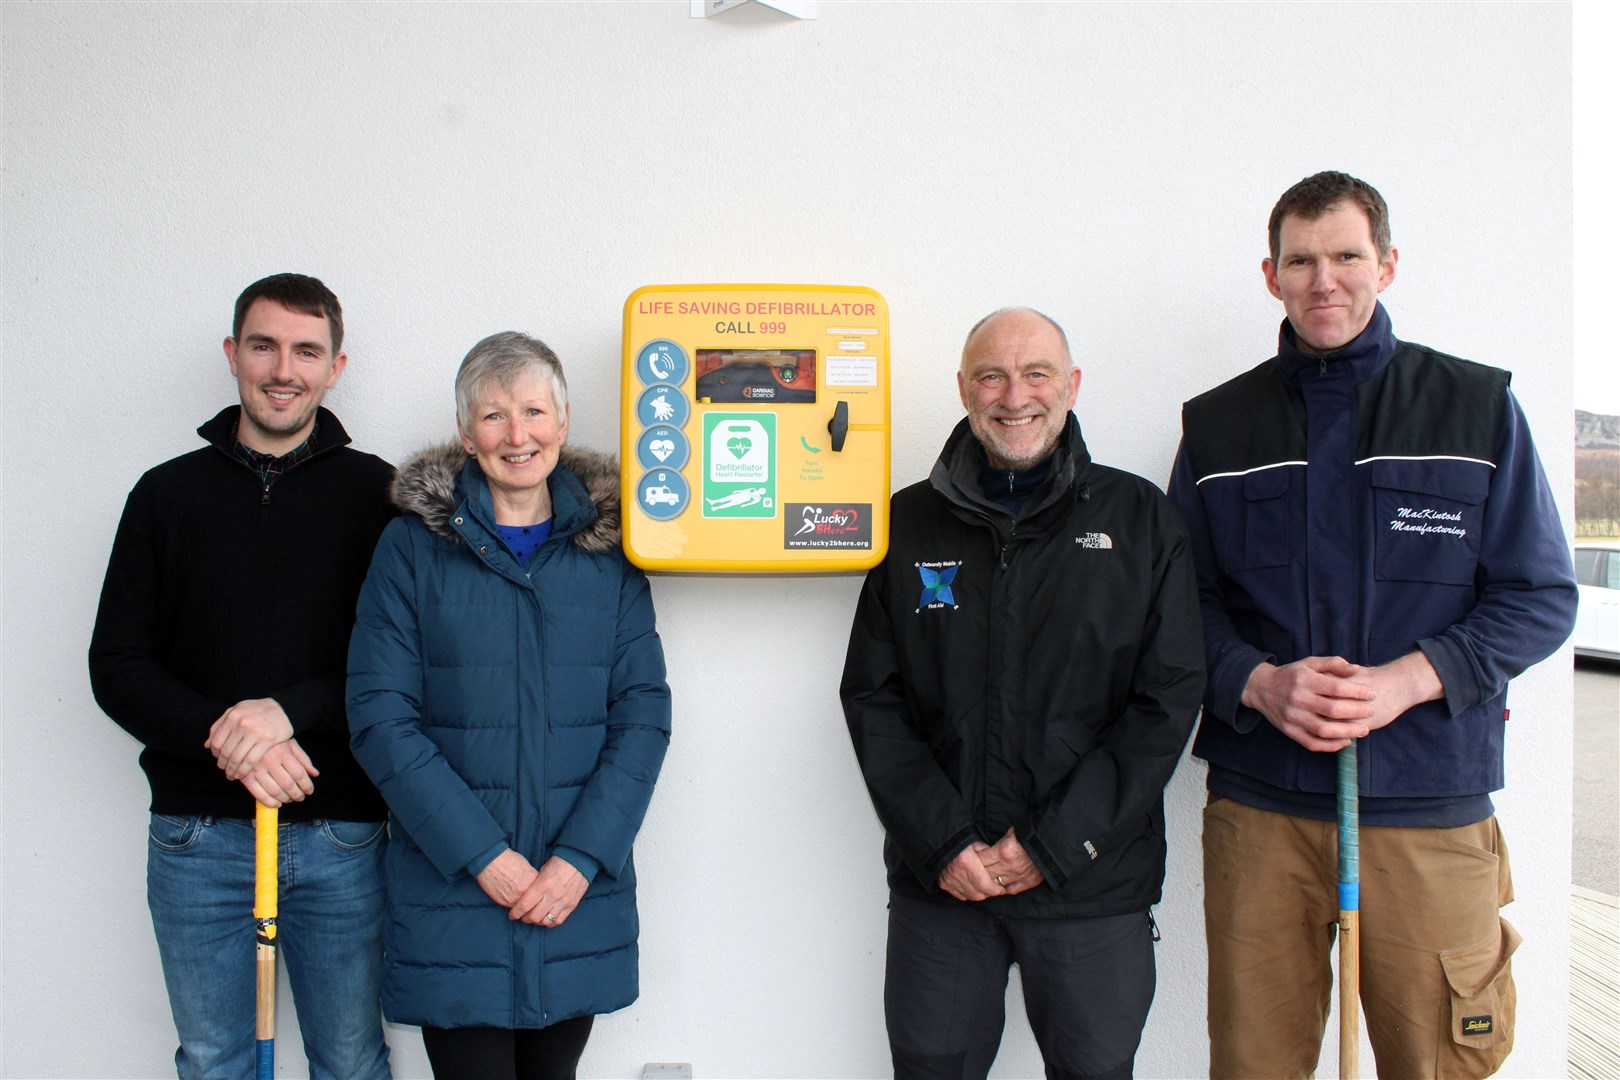 Safely installed: The new defibrillator will serve the community say Isla Russell, Ian Jones and Newtonmore Shinty Club's Michael Russell and Fraser Mackintosh.